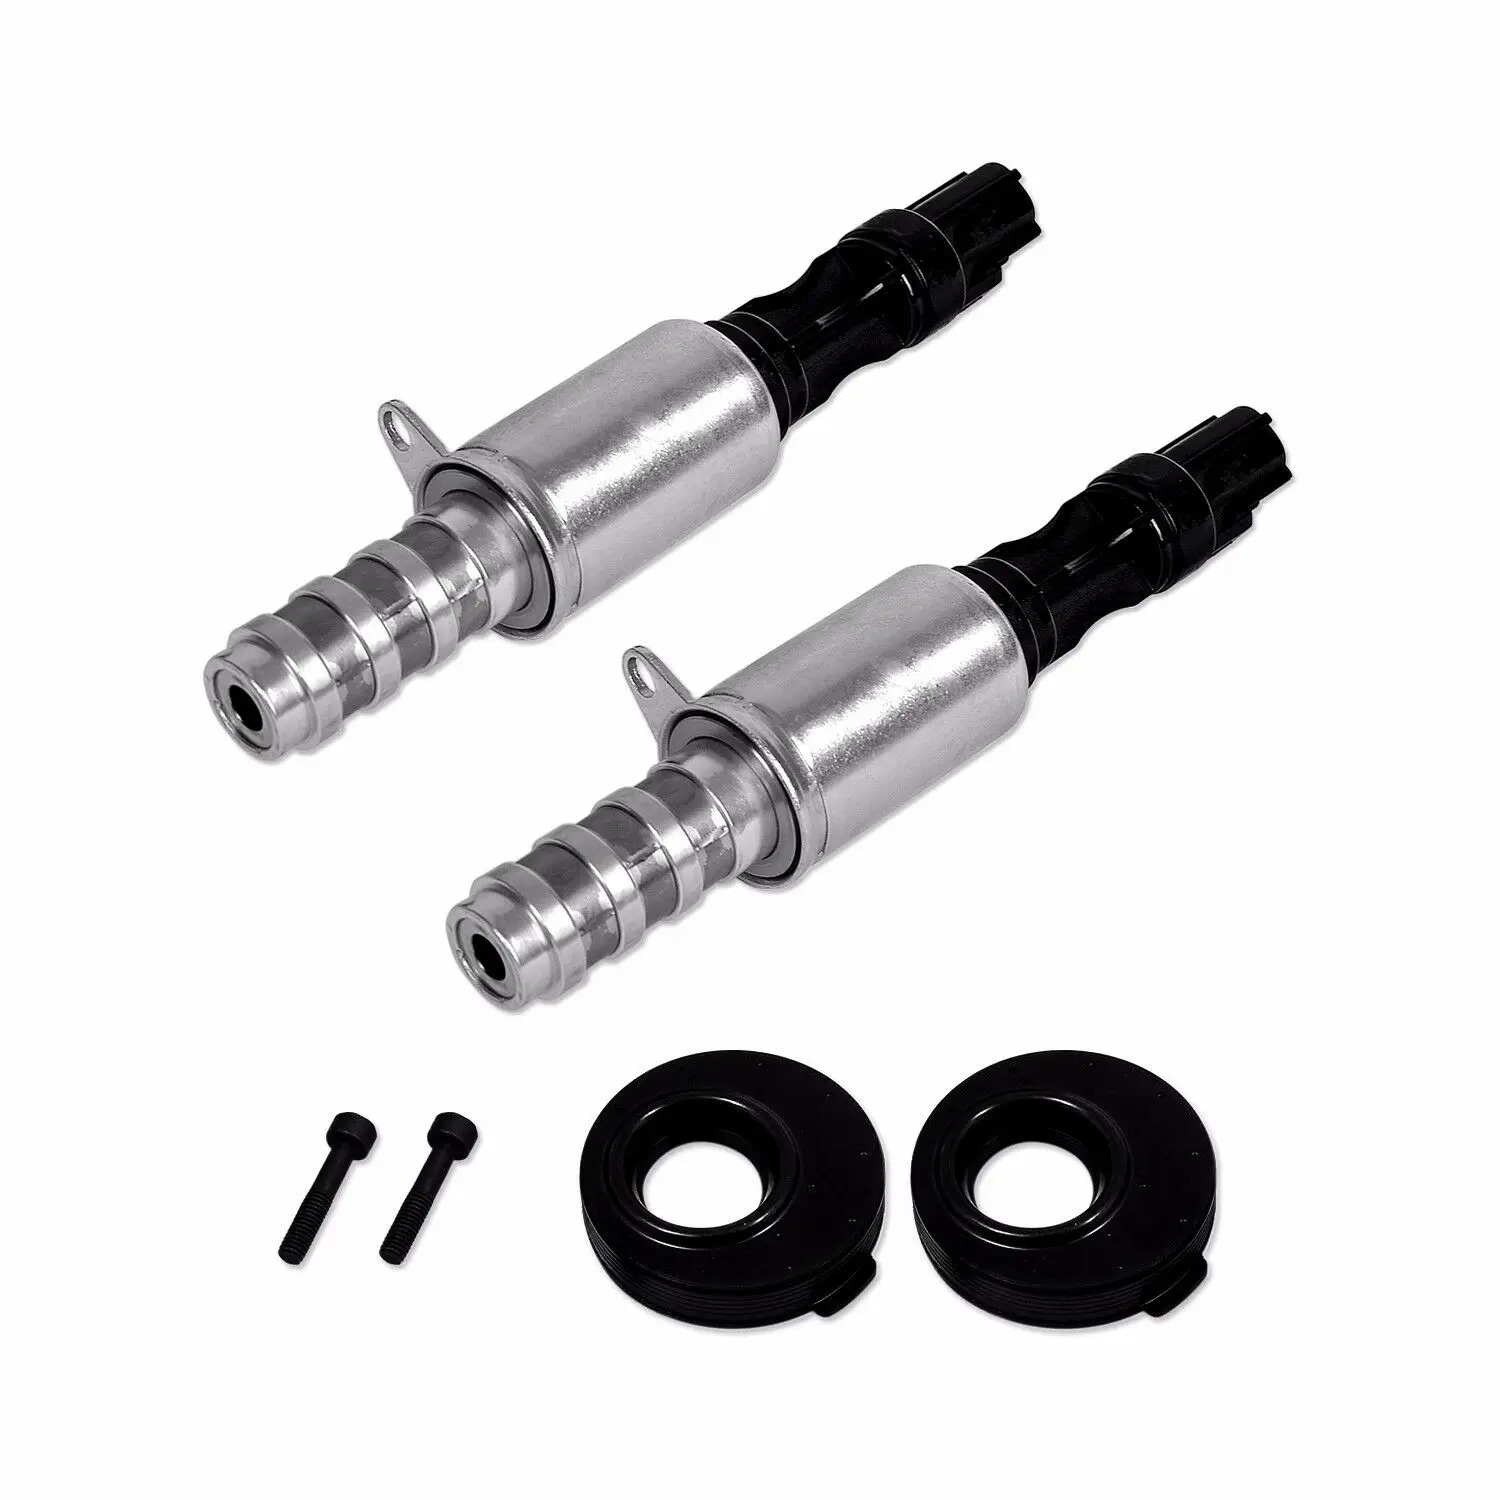 

Pair of Engine Variable Timing Solenoid VCT Valve Seal Screw For Ford Expedition Explorer F150 F250 F350 Mustang Lincoln V8